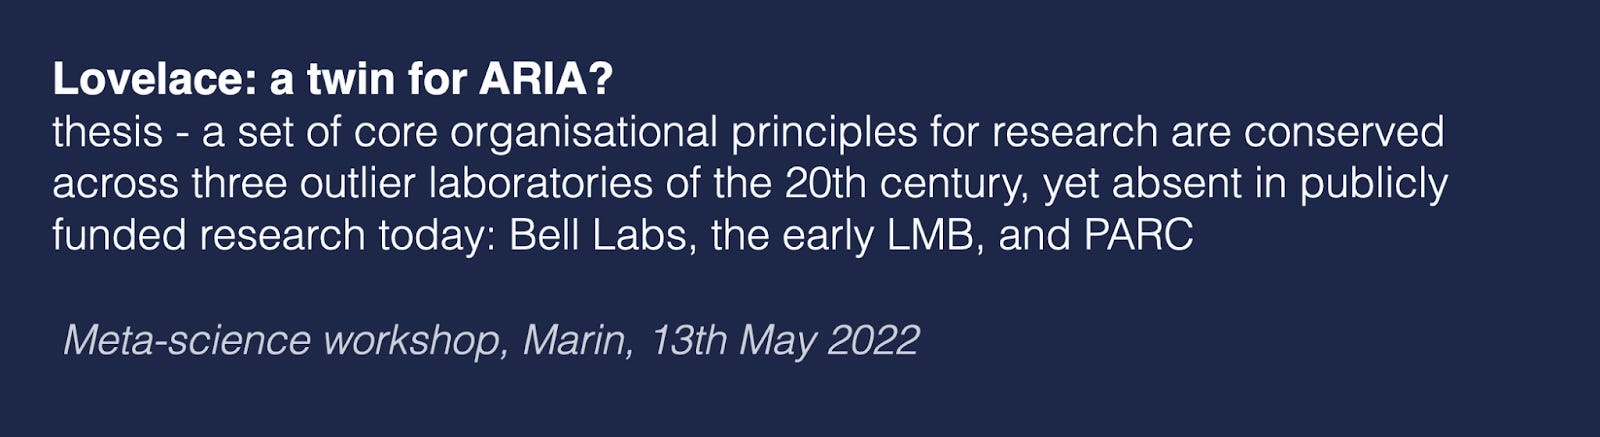 S&T - 2019 Working notes titled 'Research ecosystems need structural  diversity' - learning from past sci/tech revolutions at Bell labs/PARC/LMB  to design new institutes